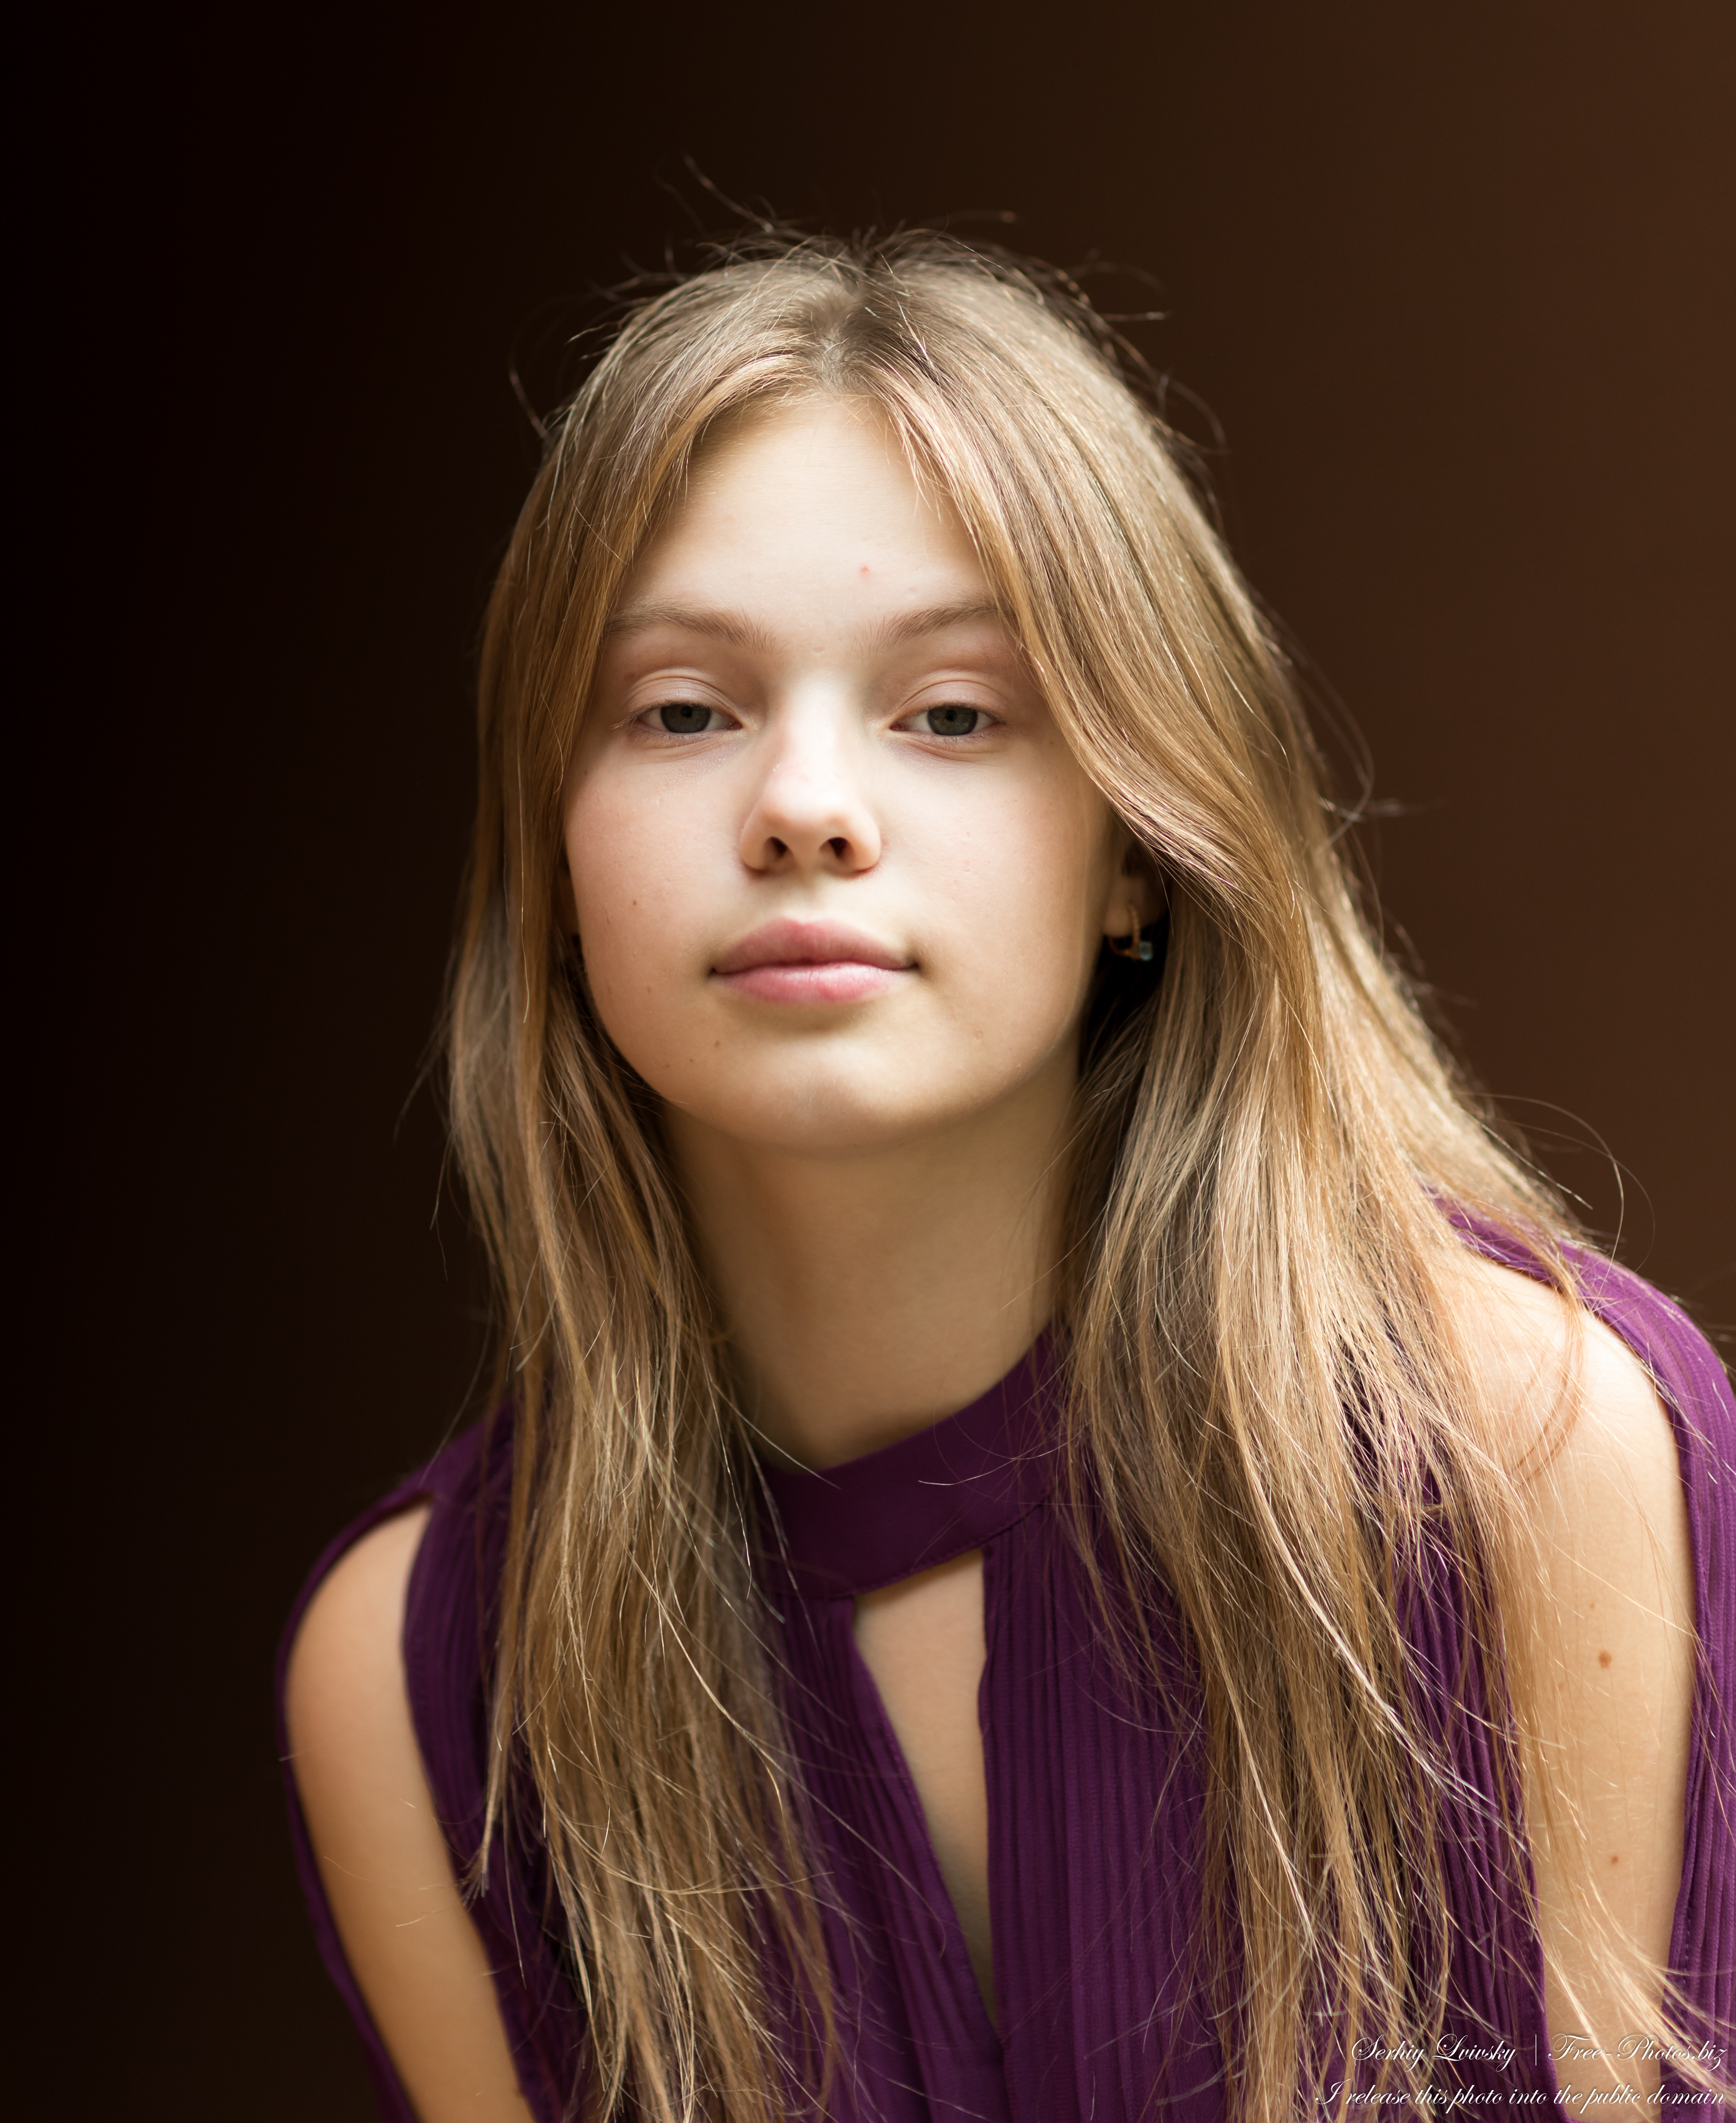 Ustyna - a 17-year-old natural fair-haired girl photographed in September 2021 by Serhiy Lvivsky, picture 9